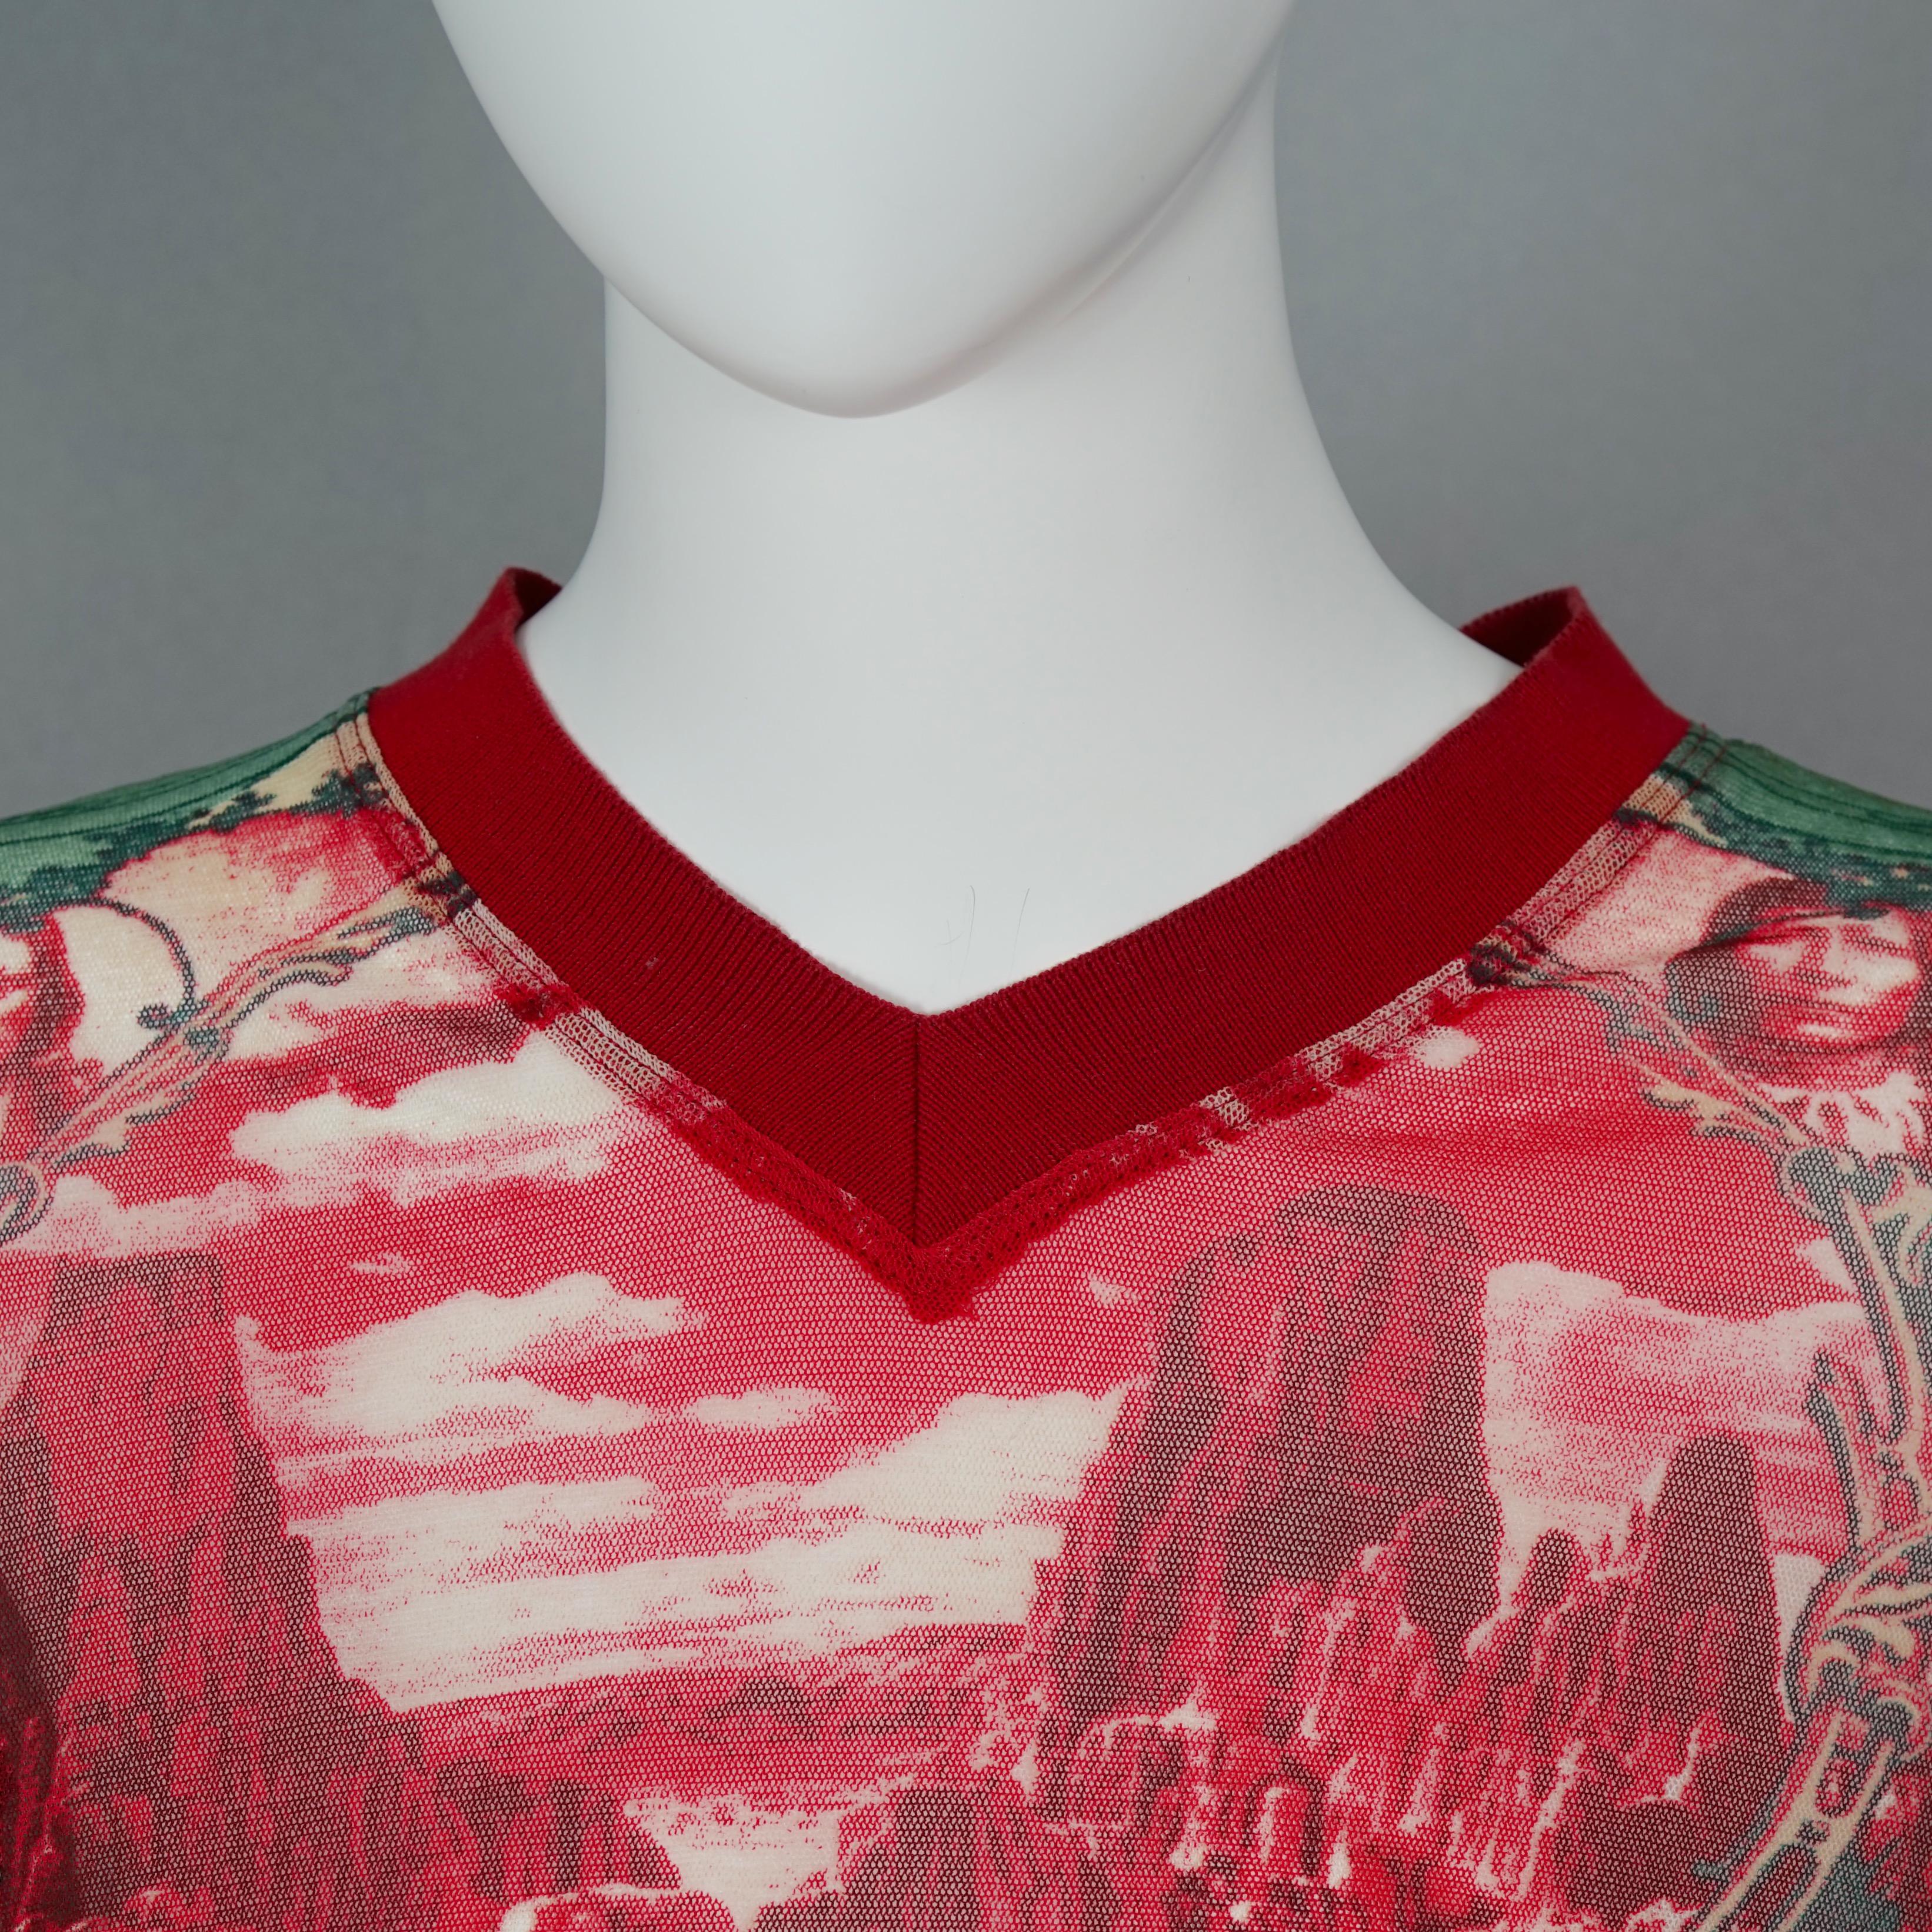 Vintage JEAN PAUL GAULTIER Native American Print Mesh Top In Excellent Condition For Sale In Kingersheim, Alsace